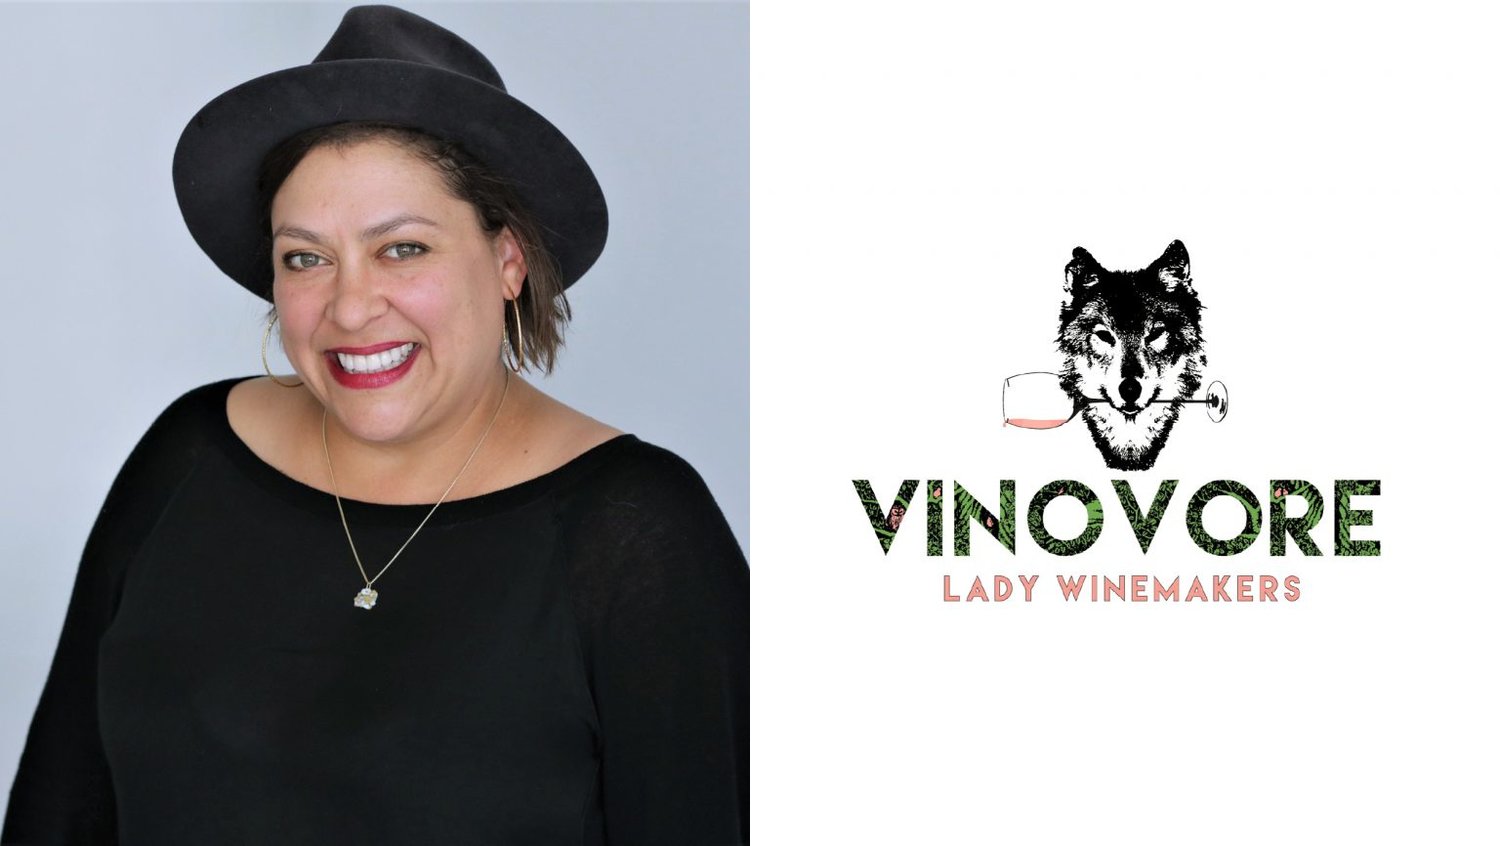  Vinovore owner Coly Den Haan portrait in a black hat and top with a necklace and red lipstick